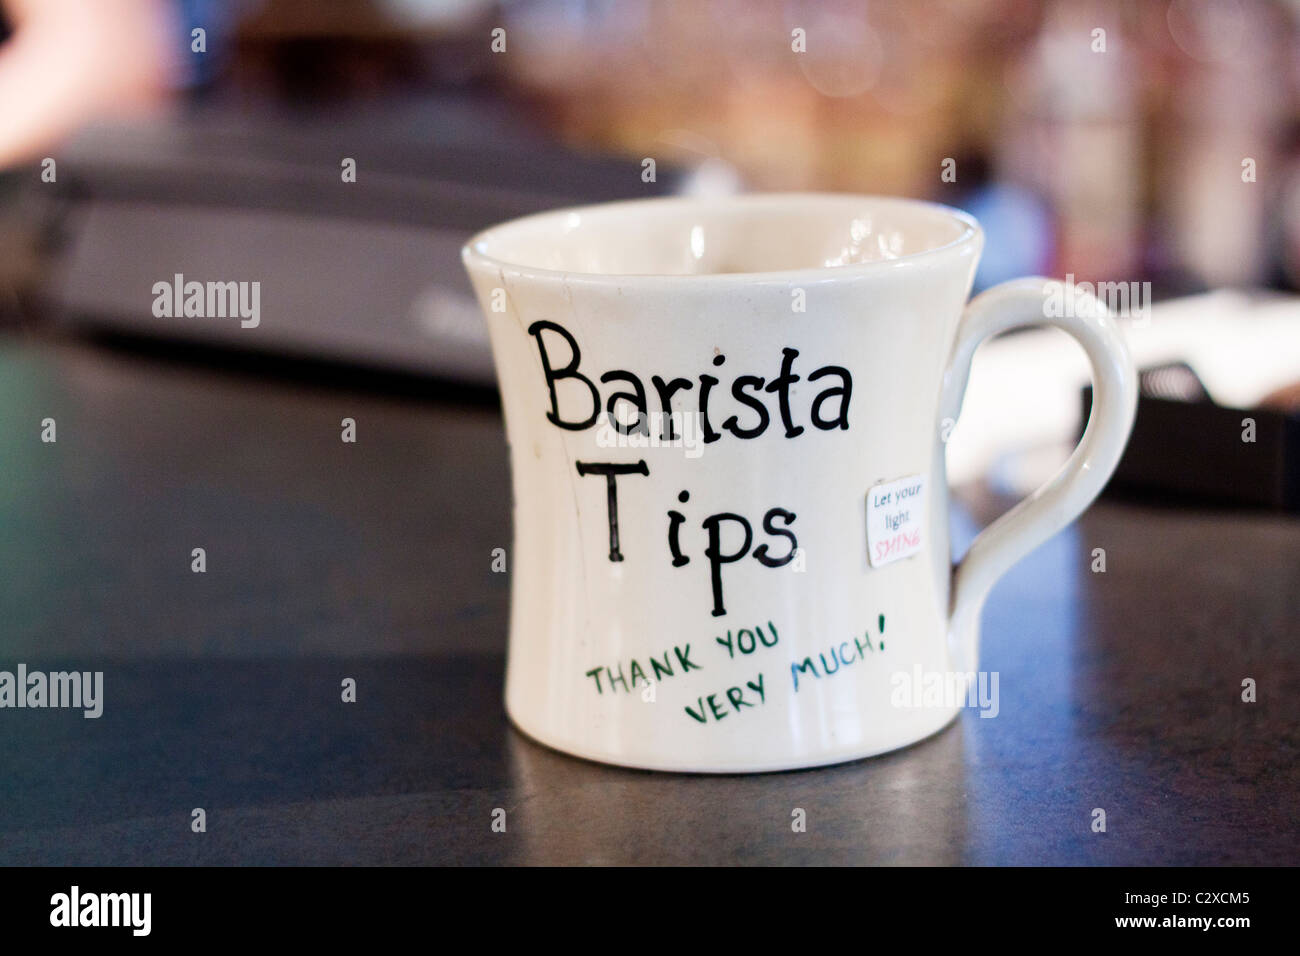 A tip jar at a coffee shop. Stock Photo